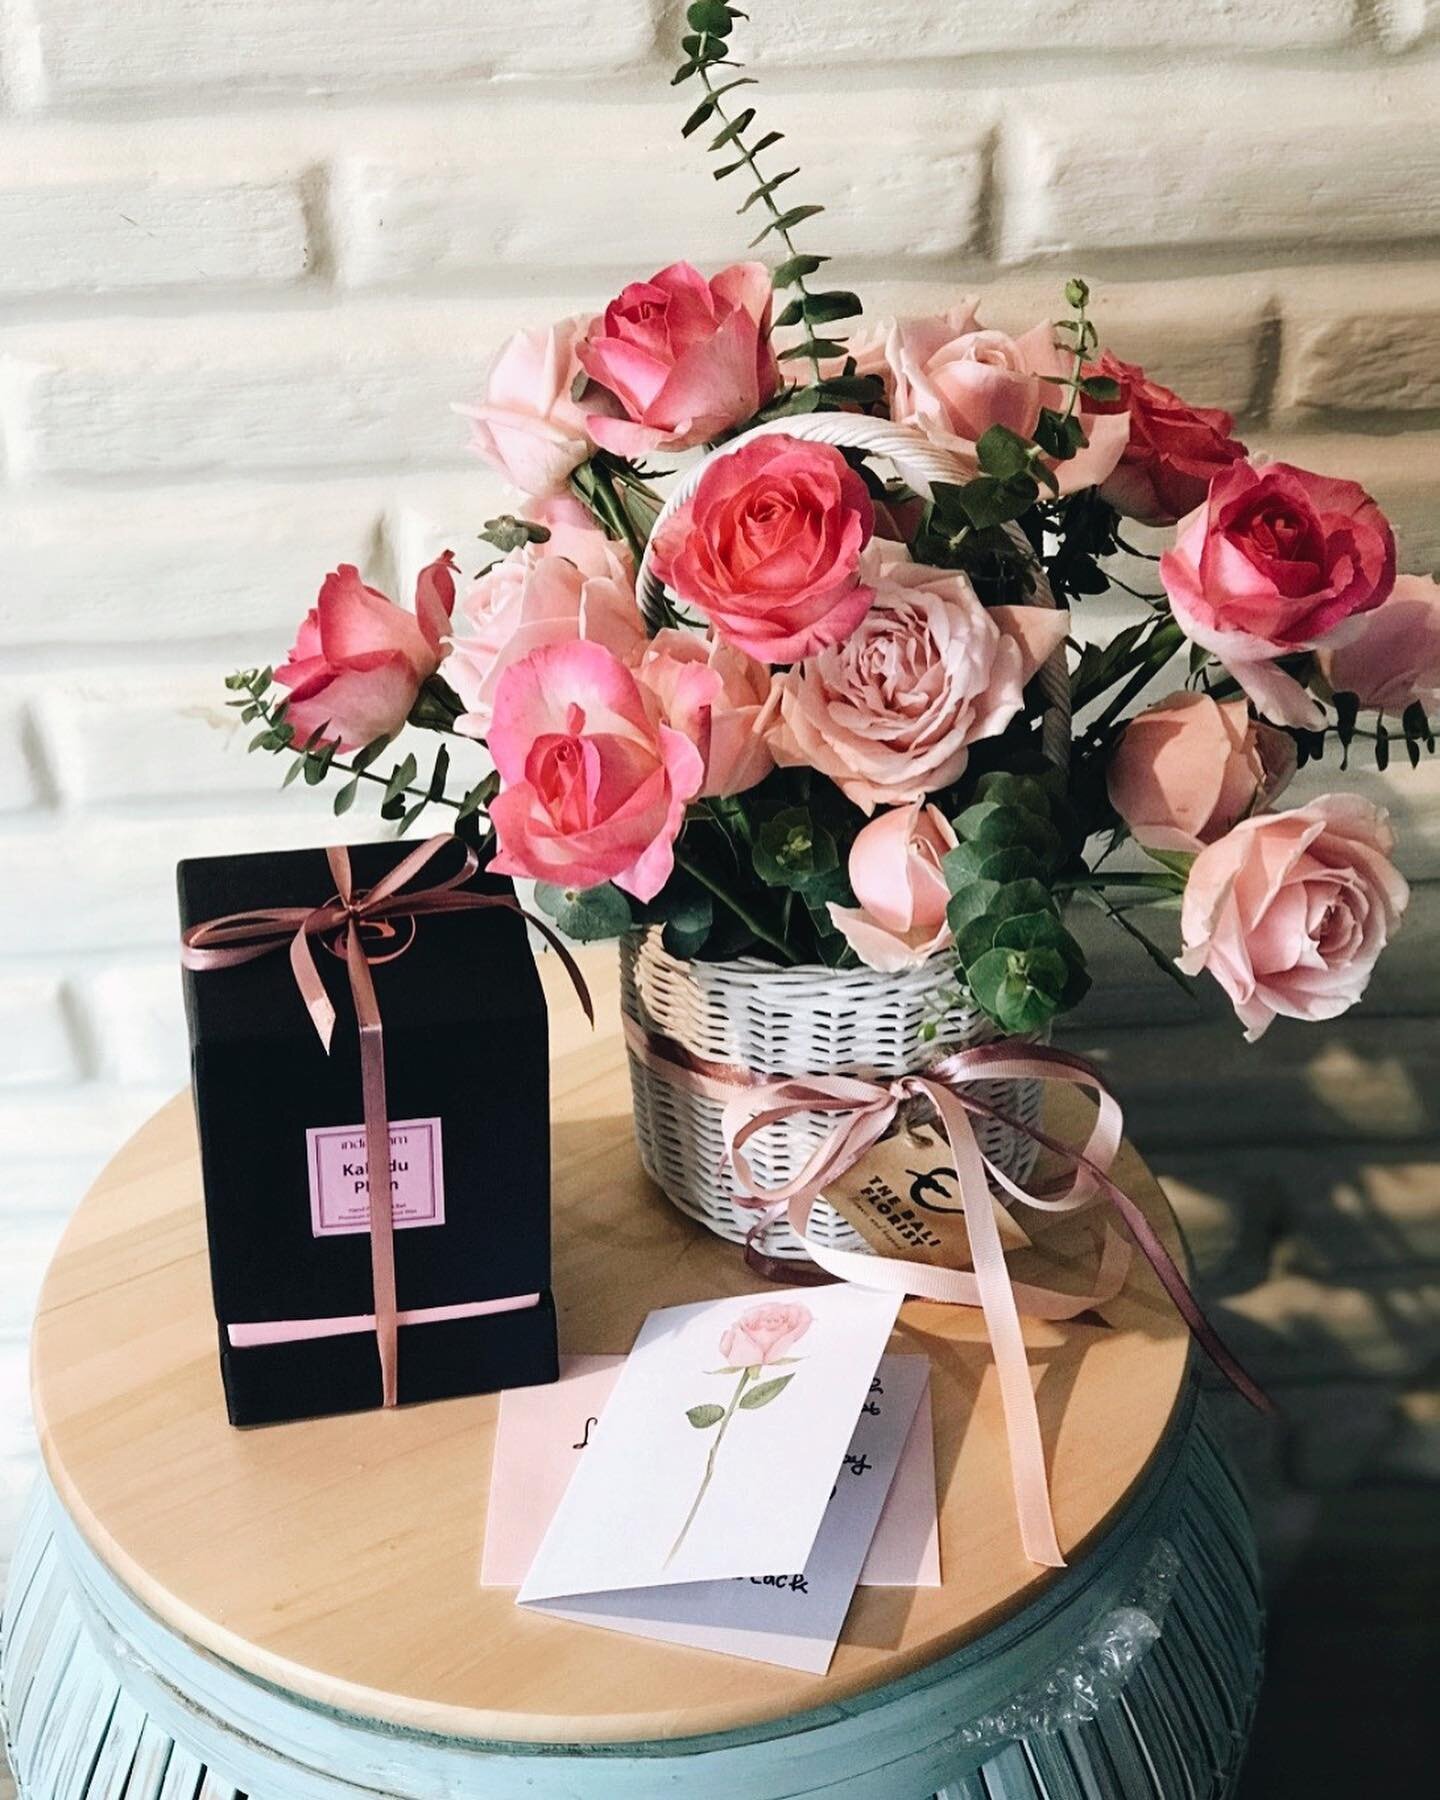 sending love with a rose basket and scented candle from @indiandemm 
. . . 
www.thebaliflorist.com
. . . 
Less wrapping | no single-use vessels | #sustainablefloristry
. . . 
Inquiries on orders/workshops
WA: (+62) 811 388 270⠀⠀⠀⠀
Email: thebaliflori